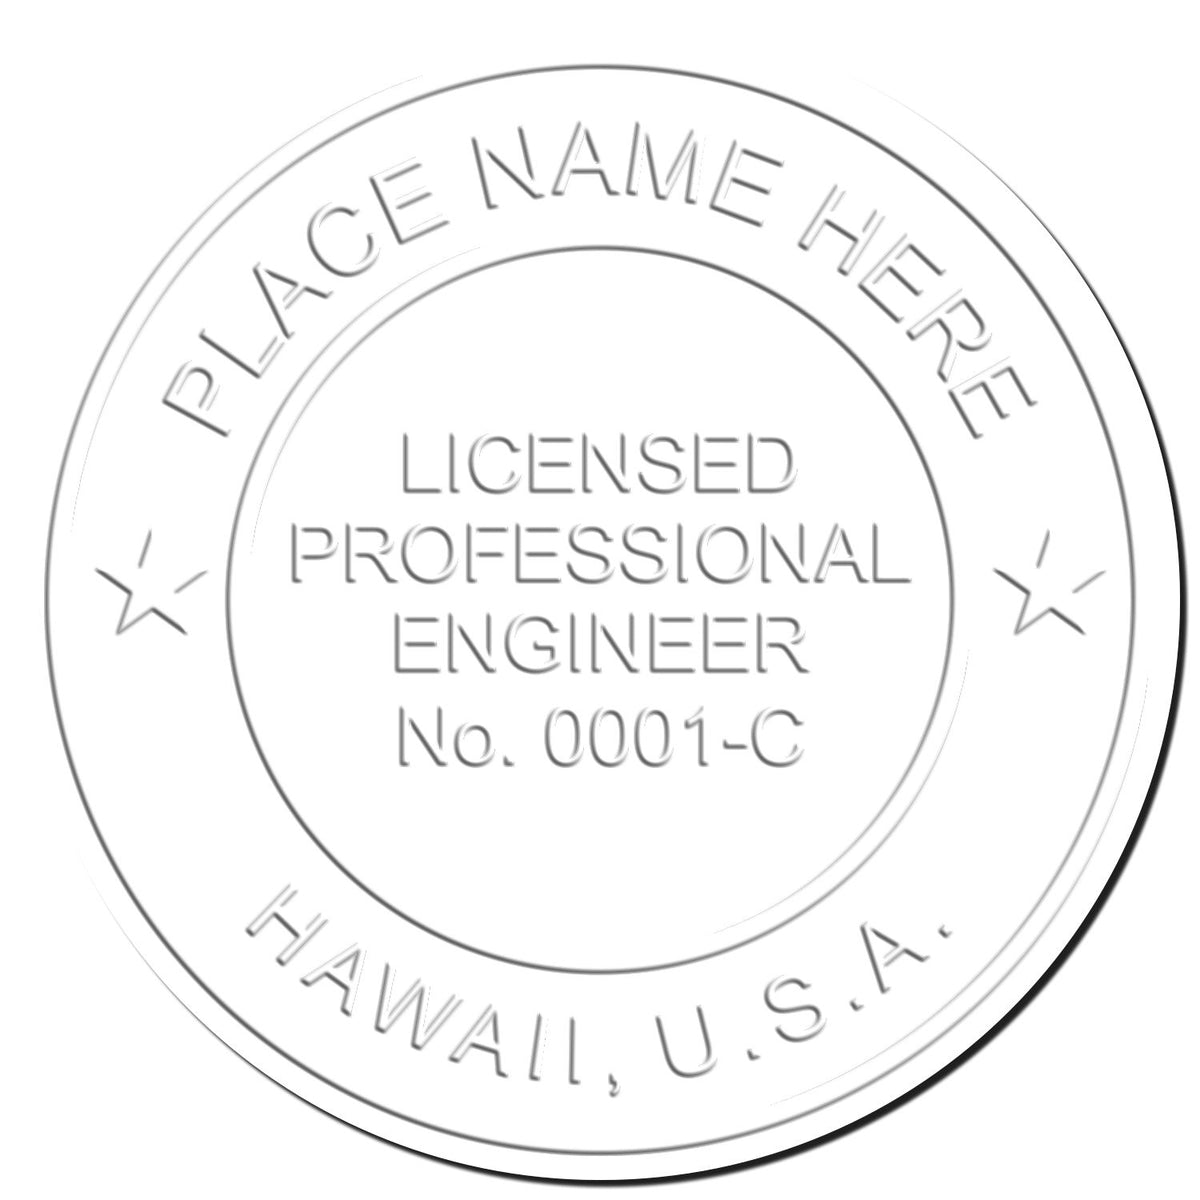 This paper is stamped with a sample imprint of the Hybrid Hawaii Engineer Seal, signifying its quality and reliability.